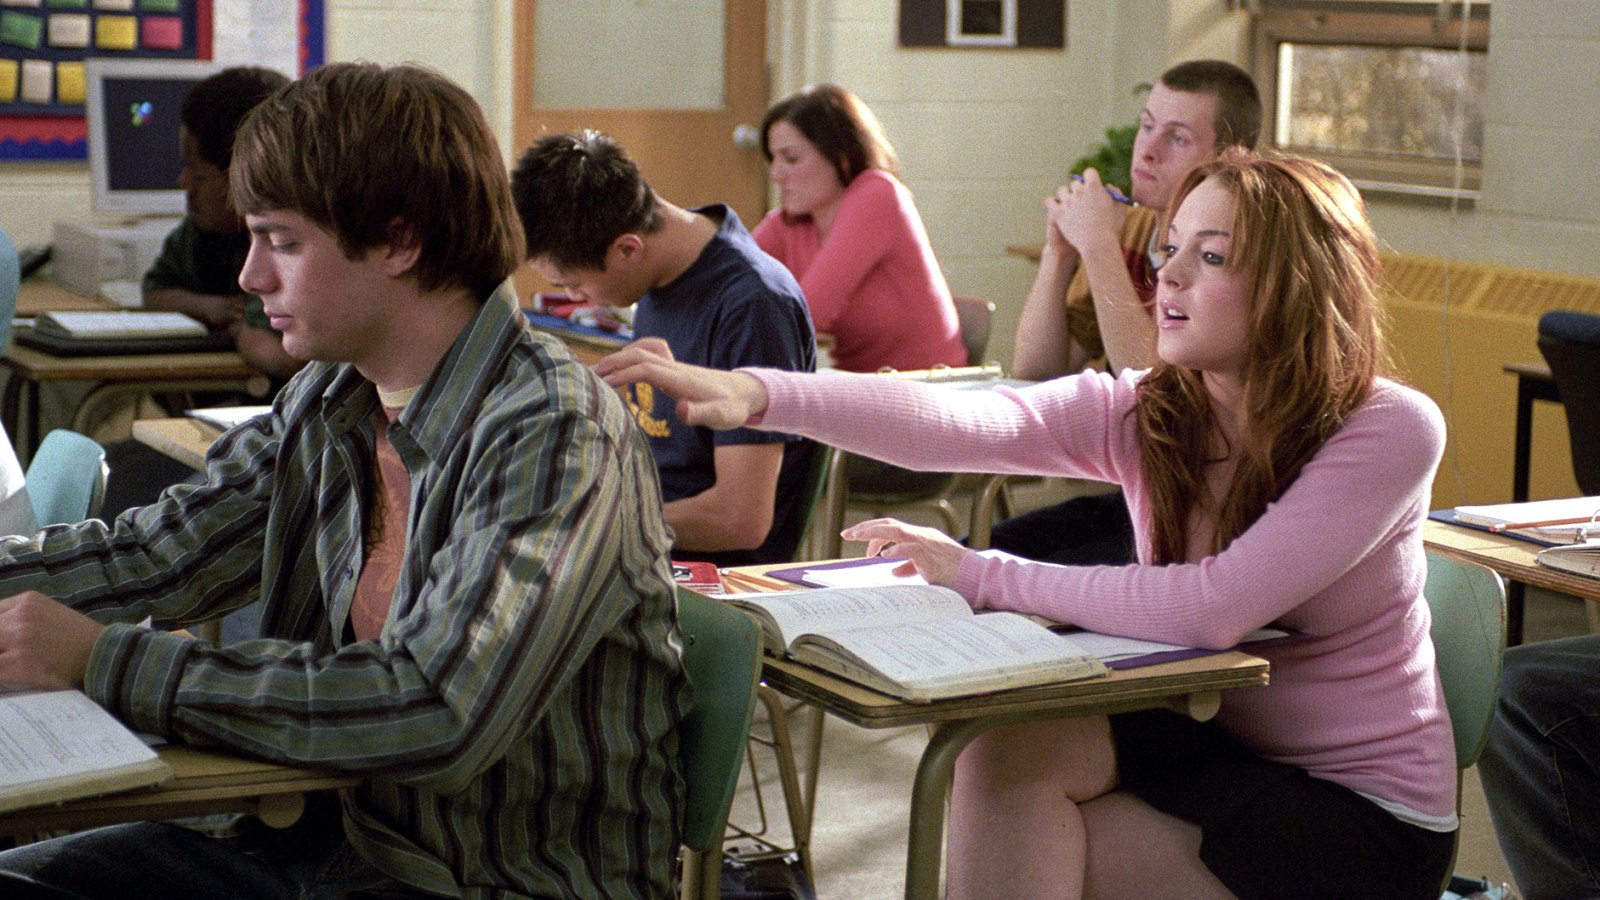 mean girls aaron samuels and cady